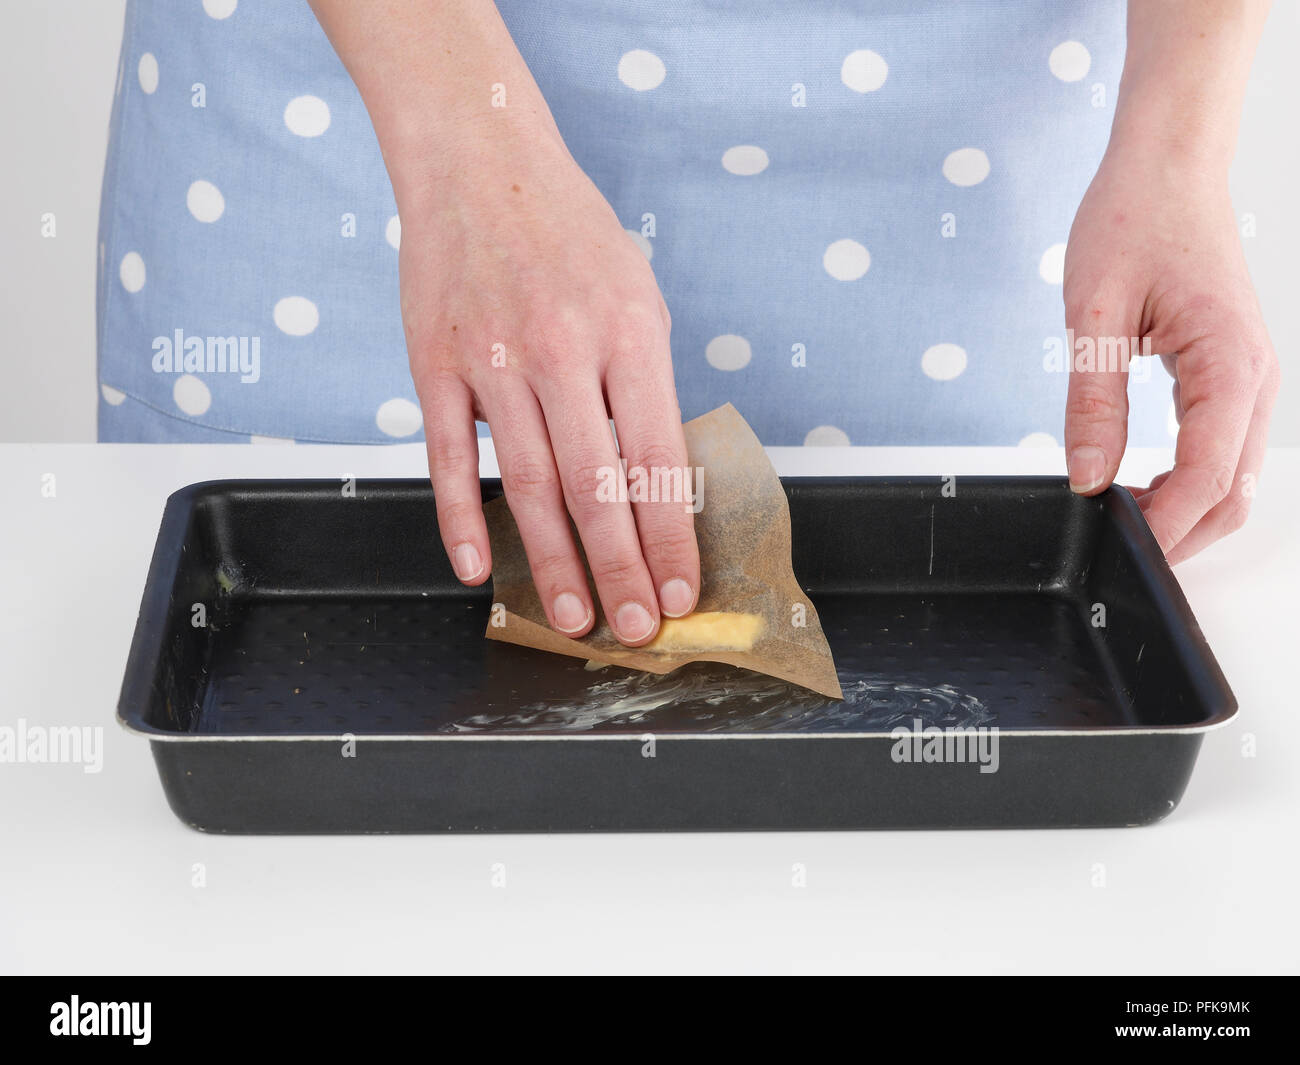 Young woman's hands greasing cake tin with butter, close-up Stock Photo